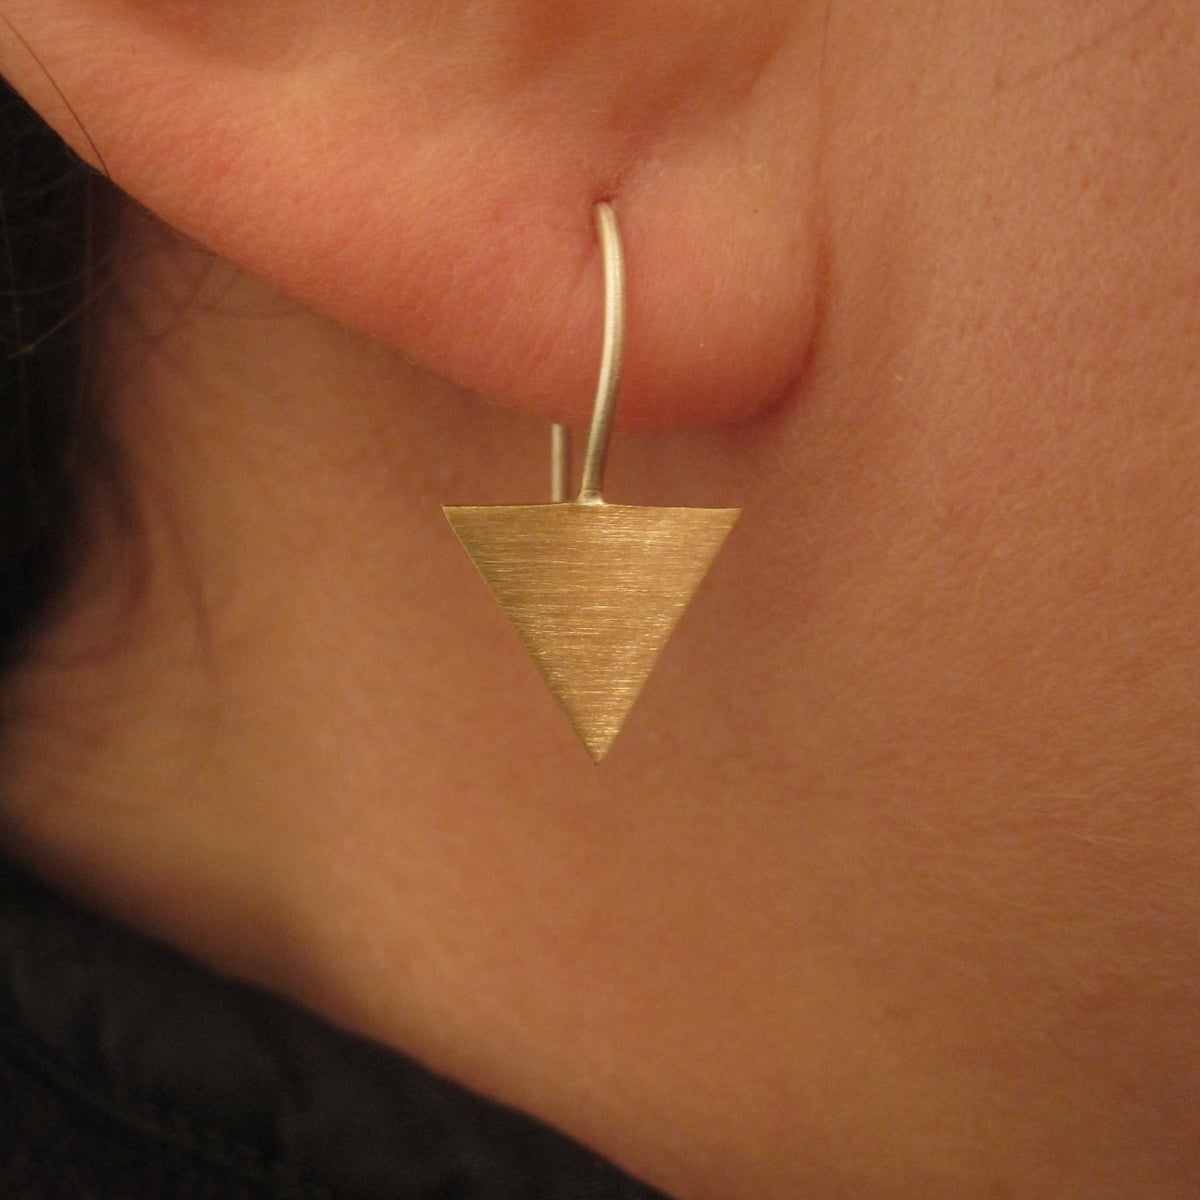 Make A Statement With These Tribal Aztec Arrow Drop Dangle Earrings - 0135 - Virginia Wynne Designs